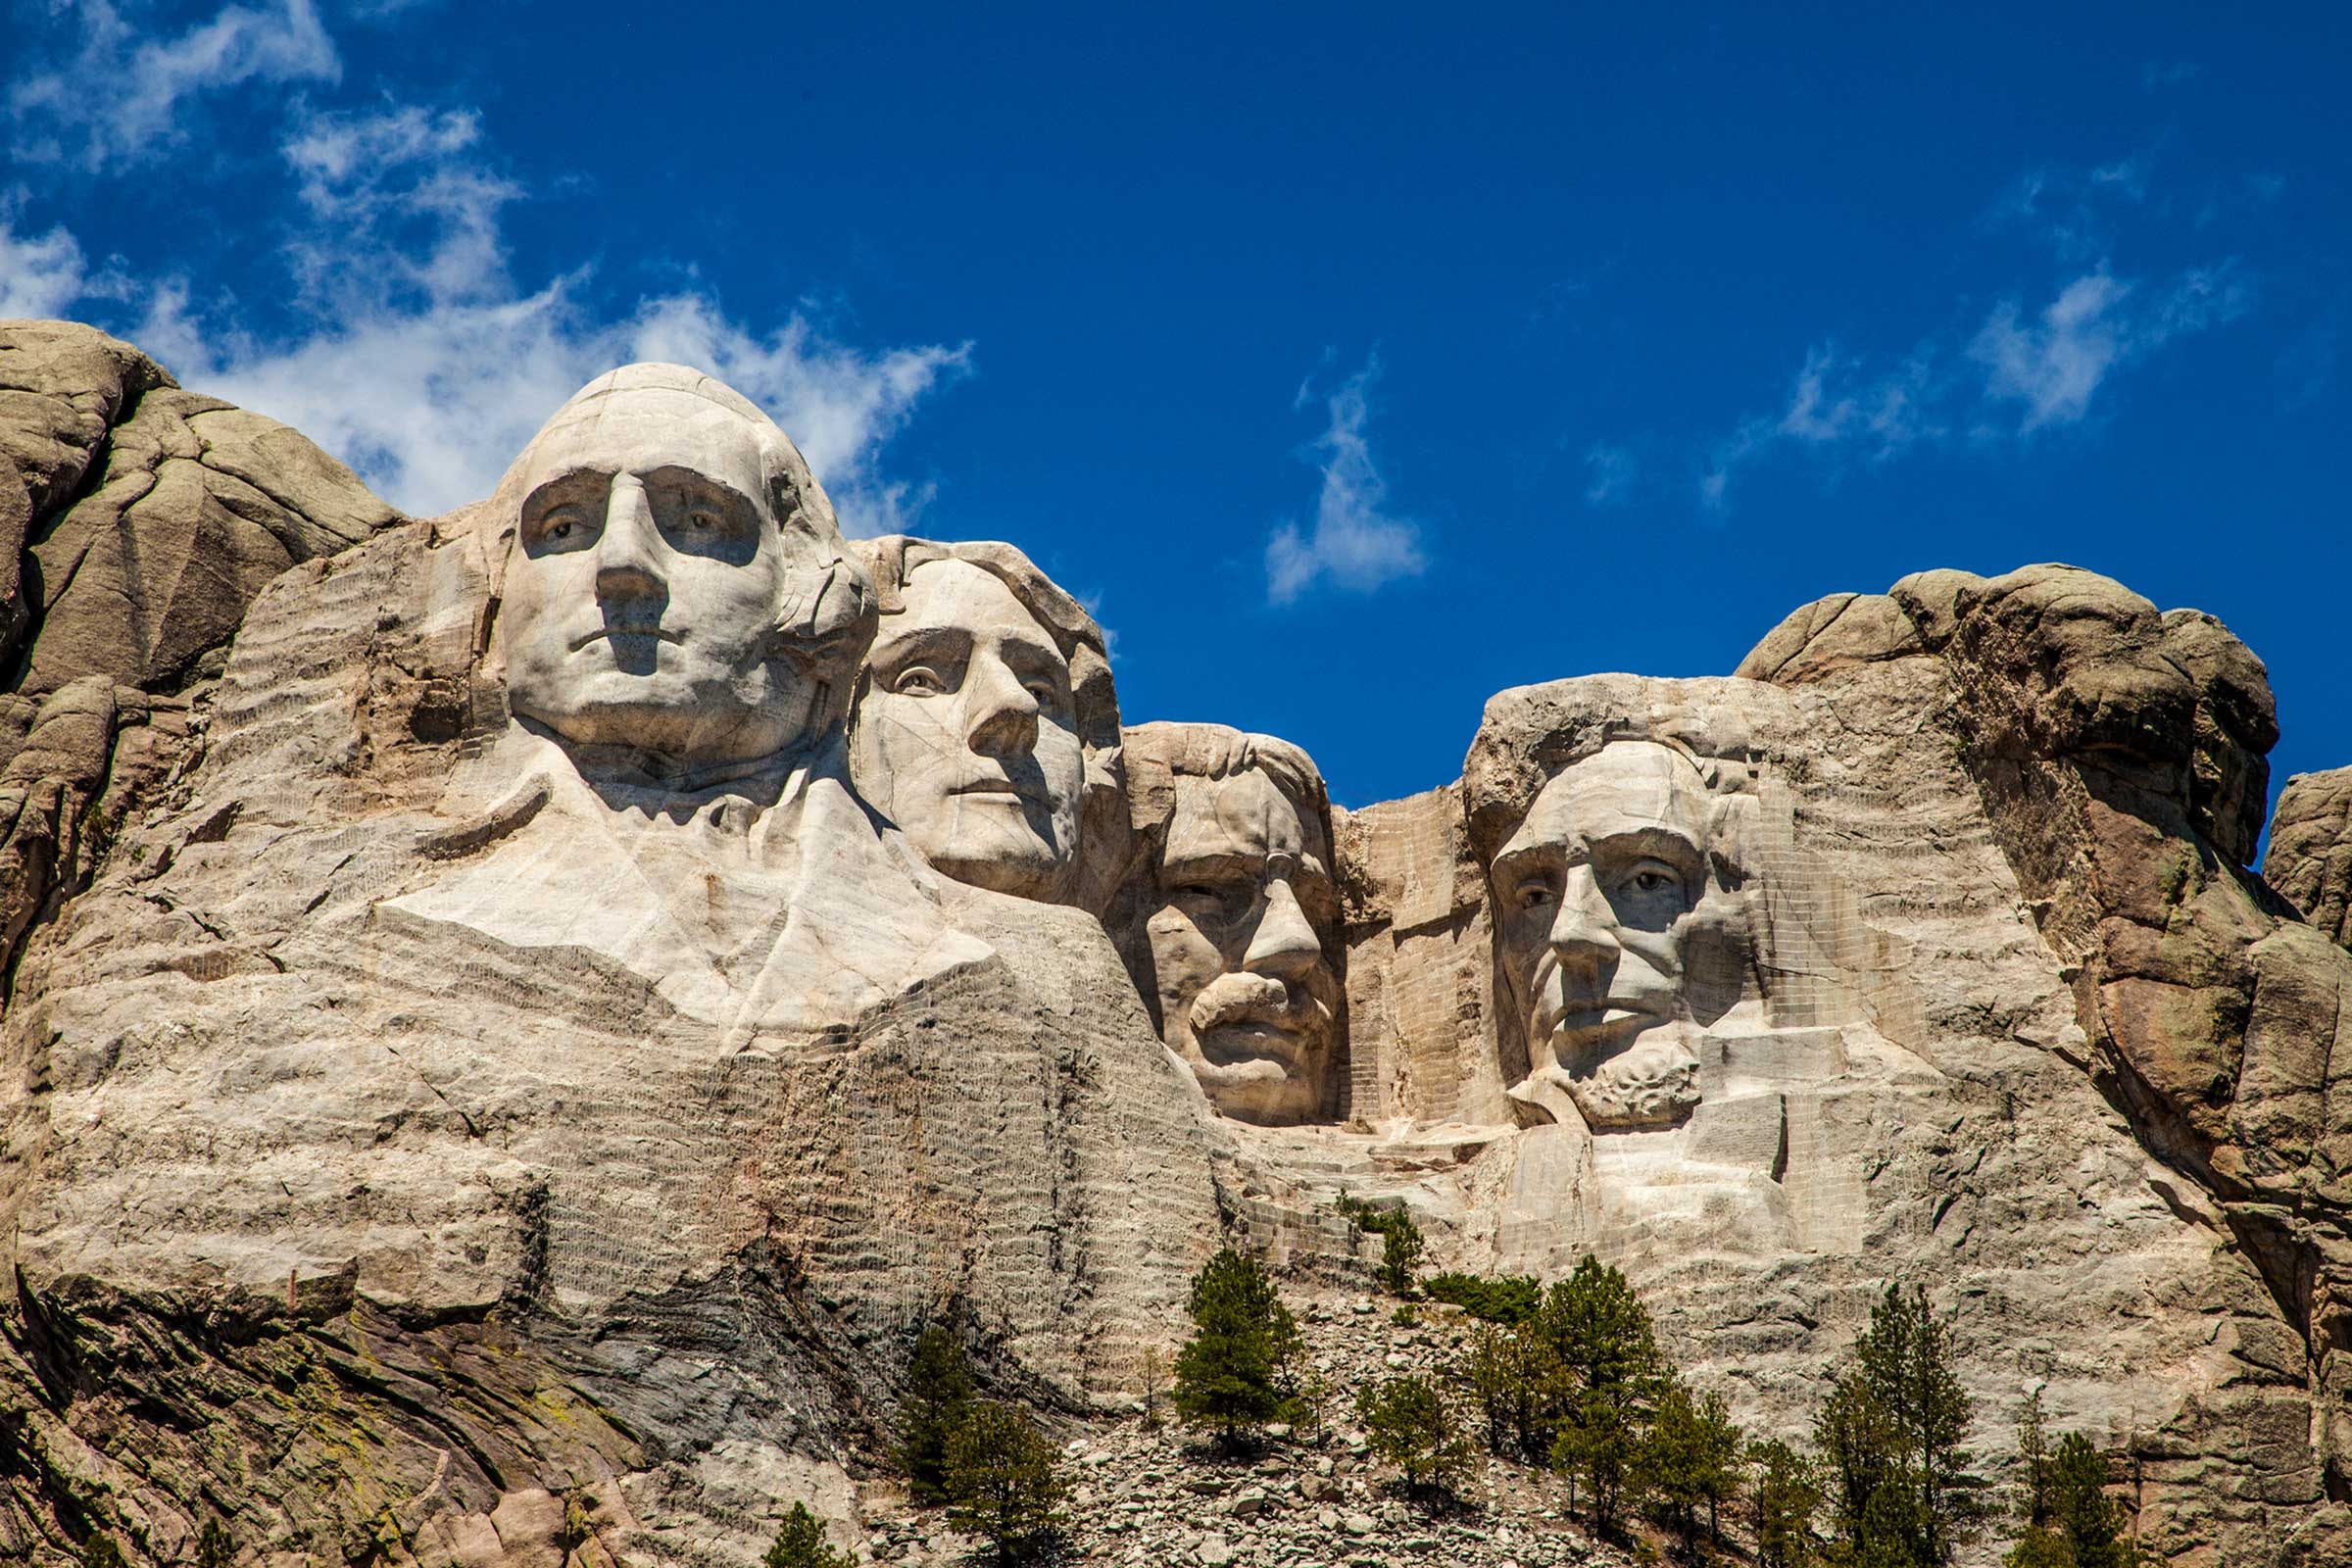 Why We Celebrate Presidents' Day | Reader’s Digest2400 x 1600